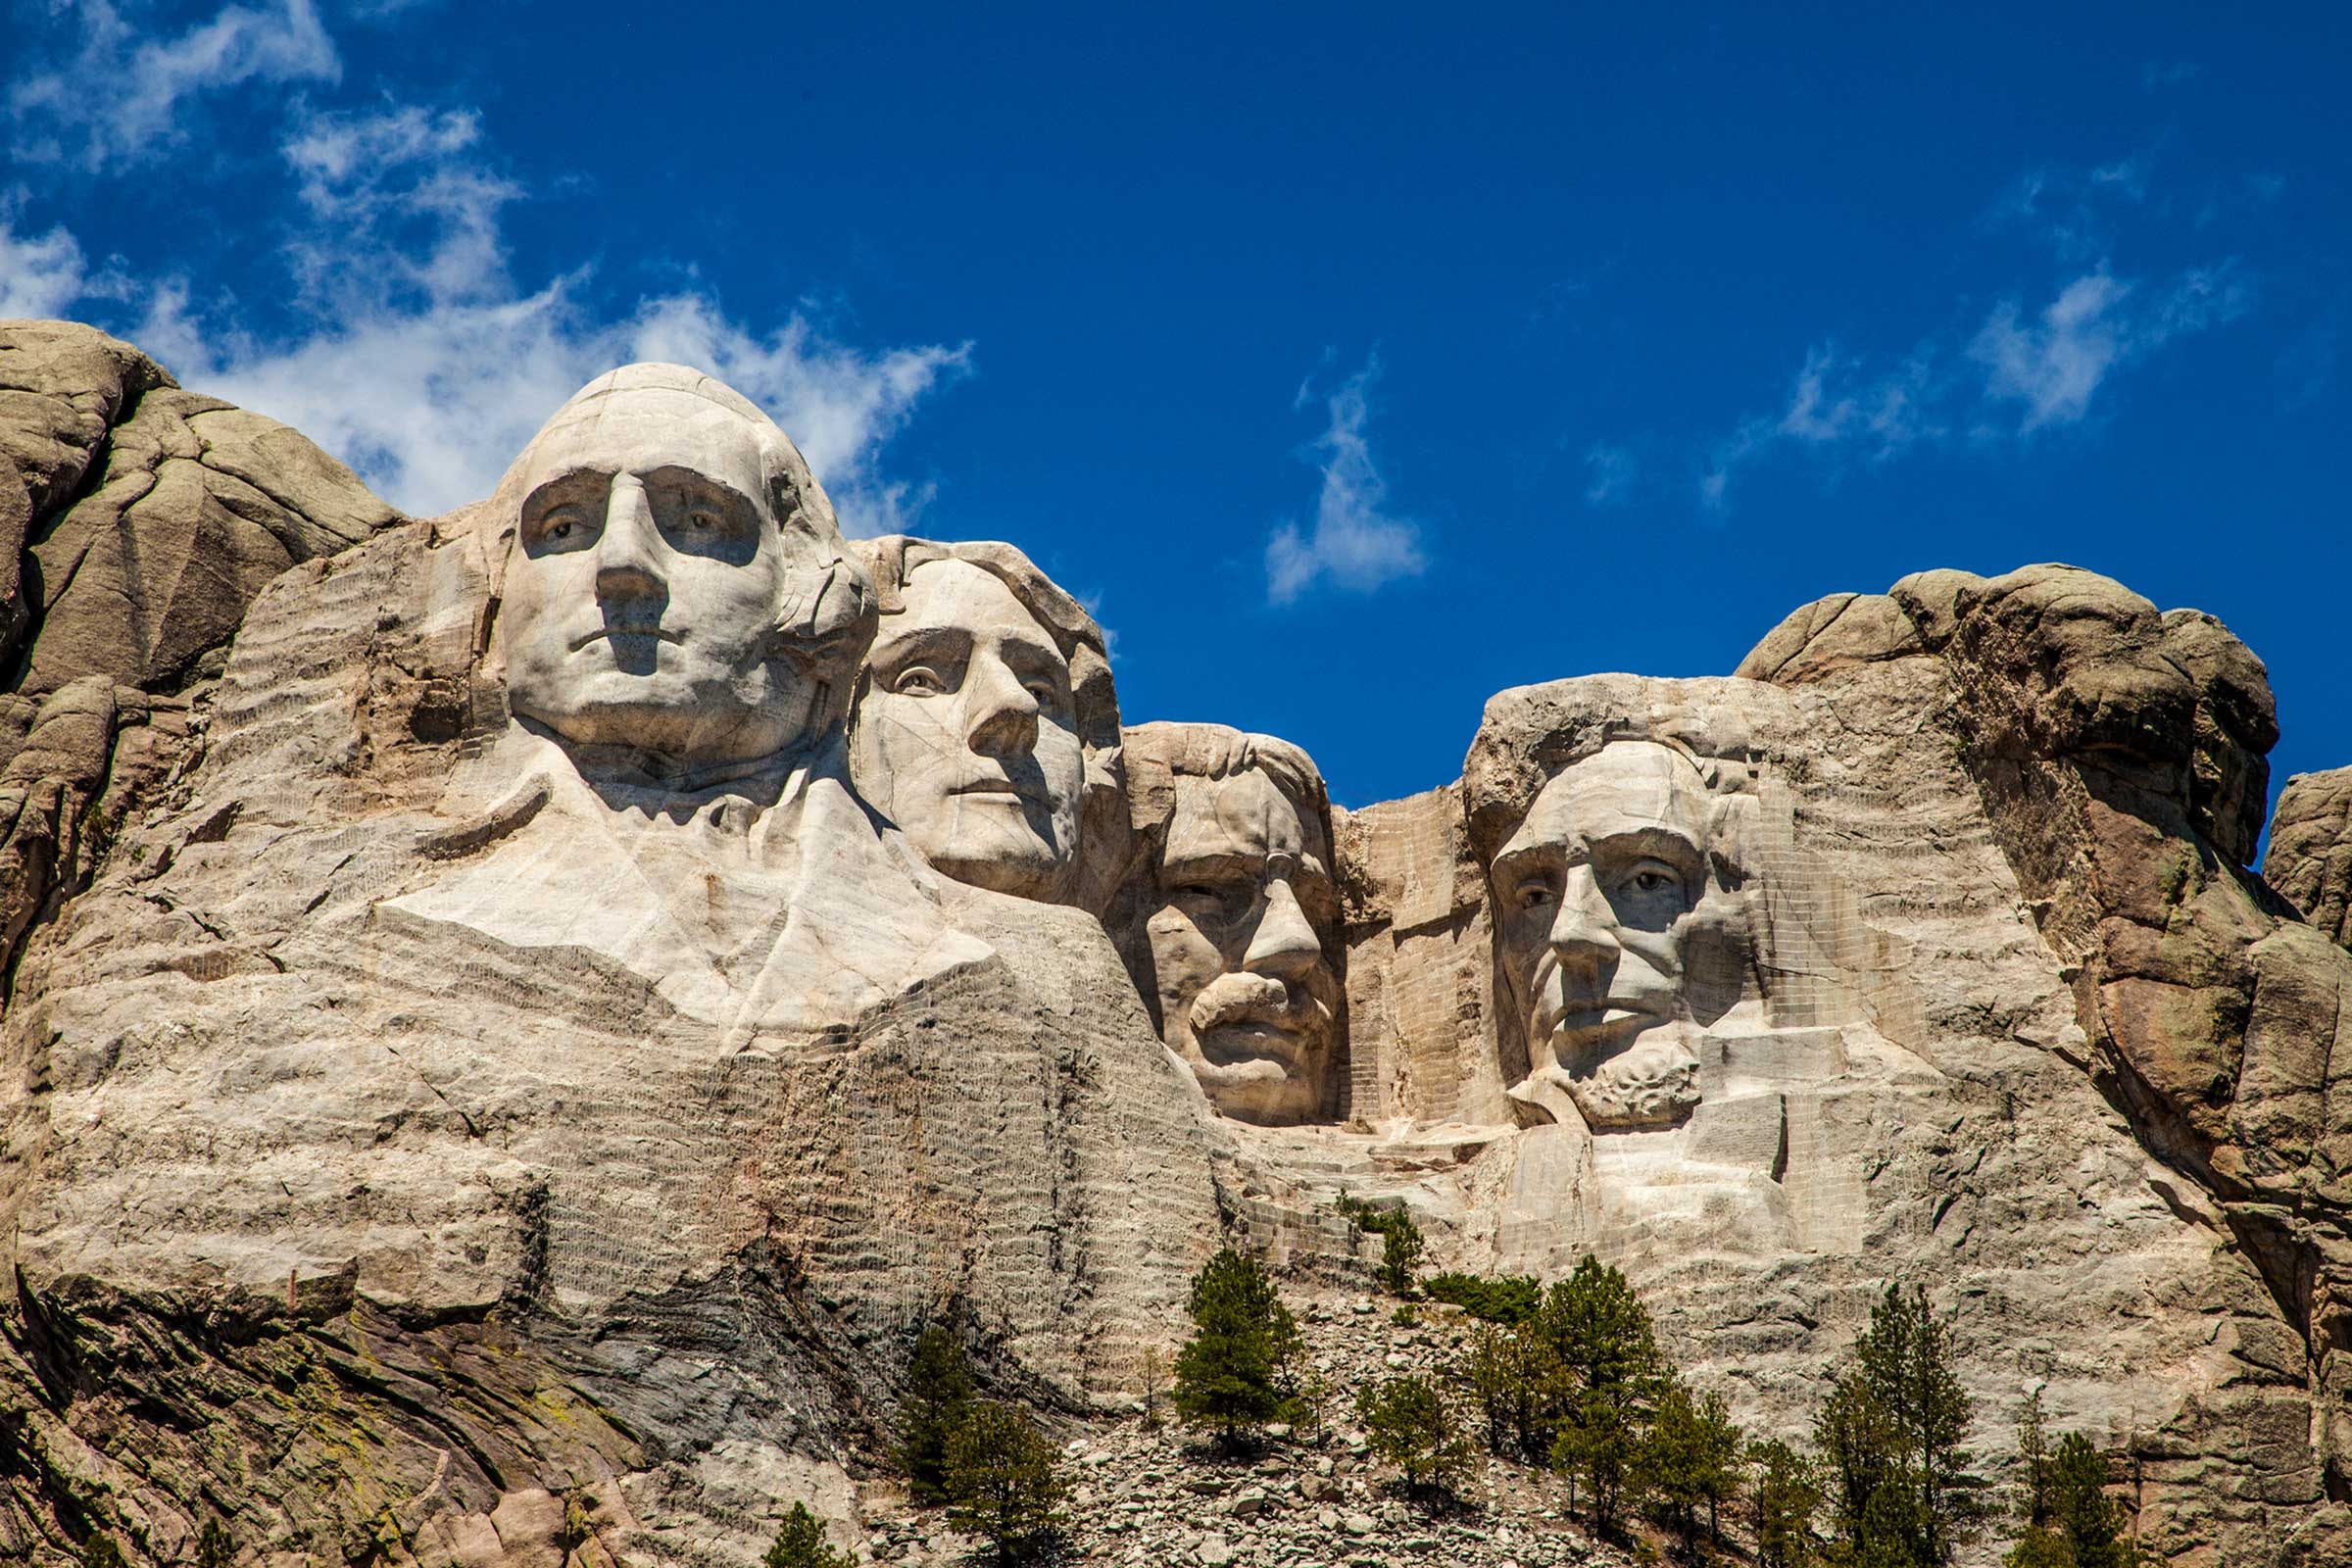 Why We Celebrate Presidents' Day | Reader’s Digest2400 x 1600